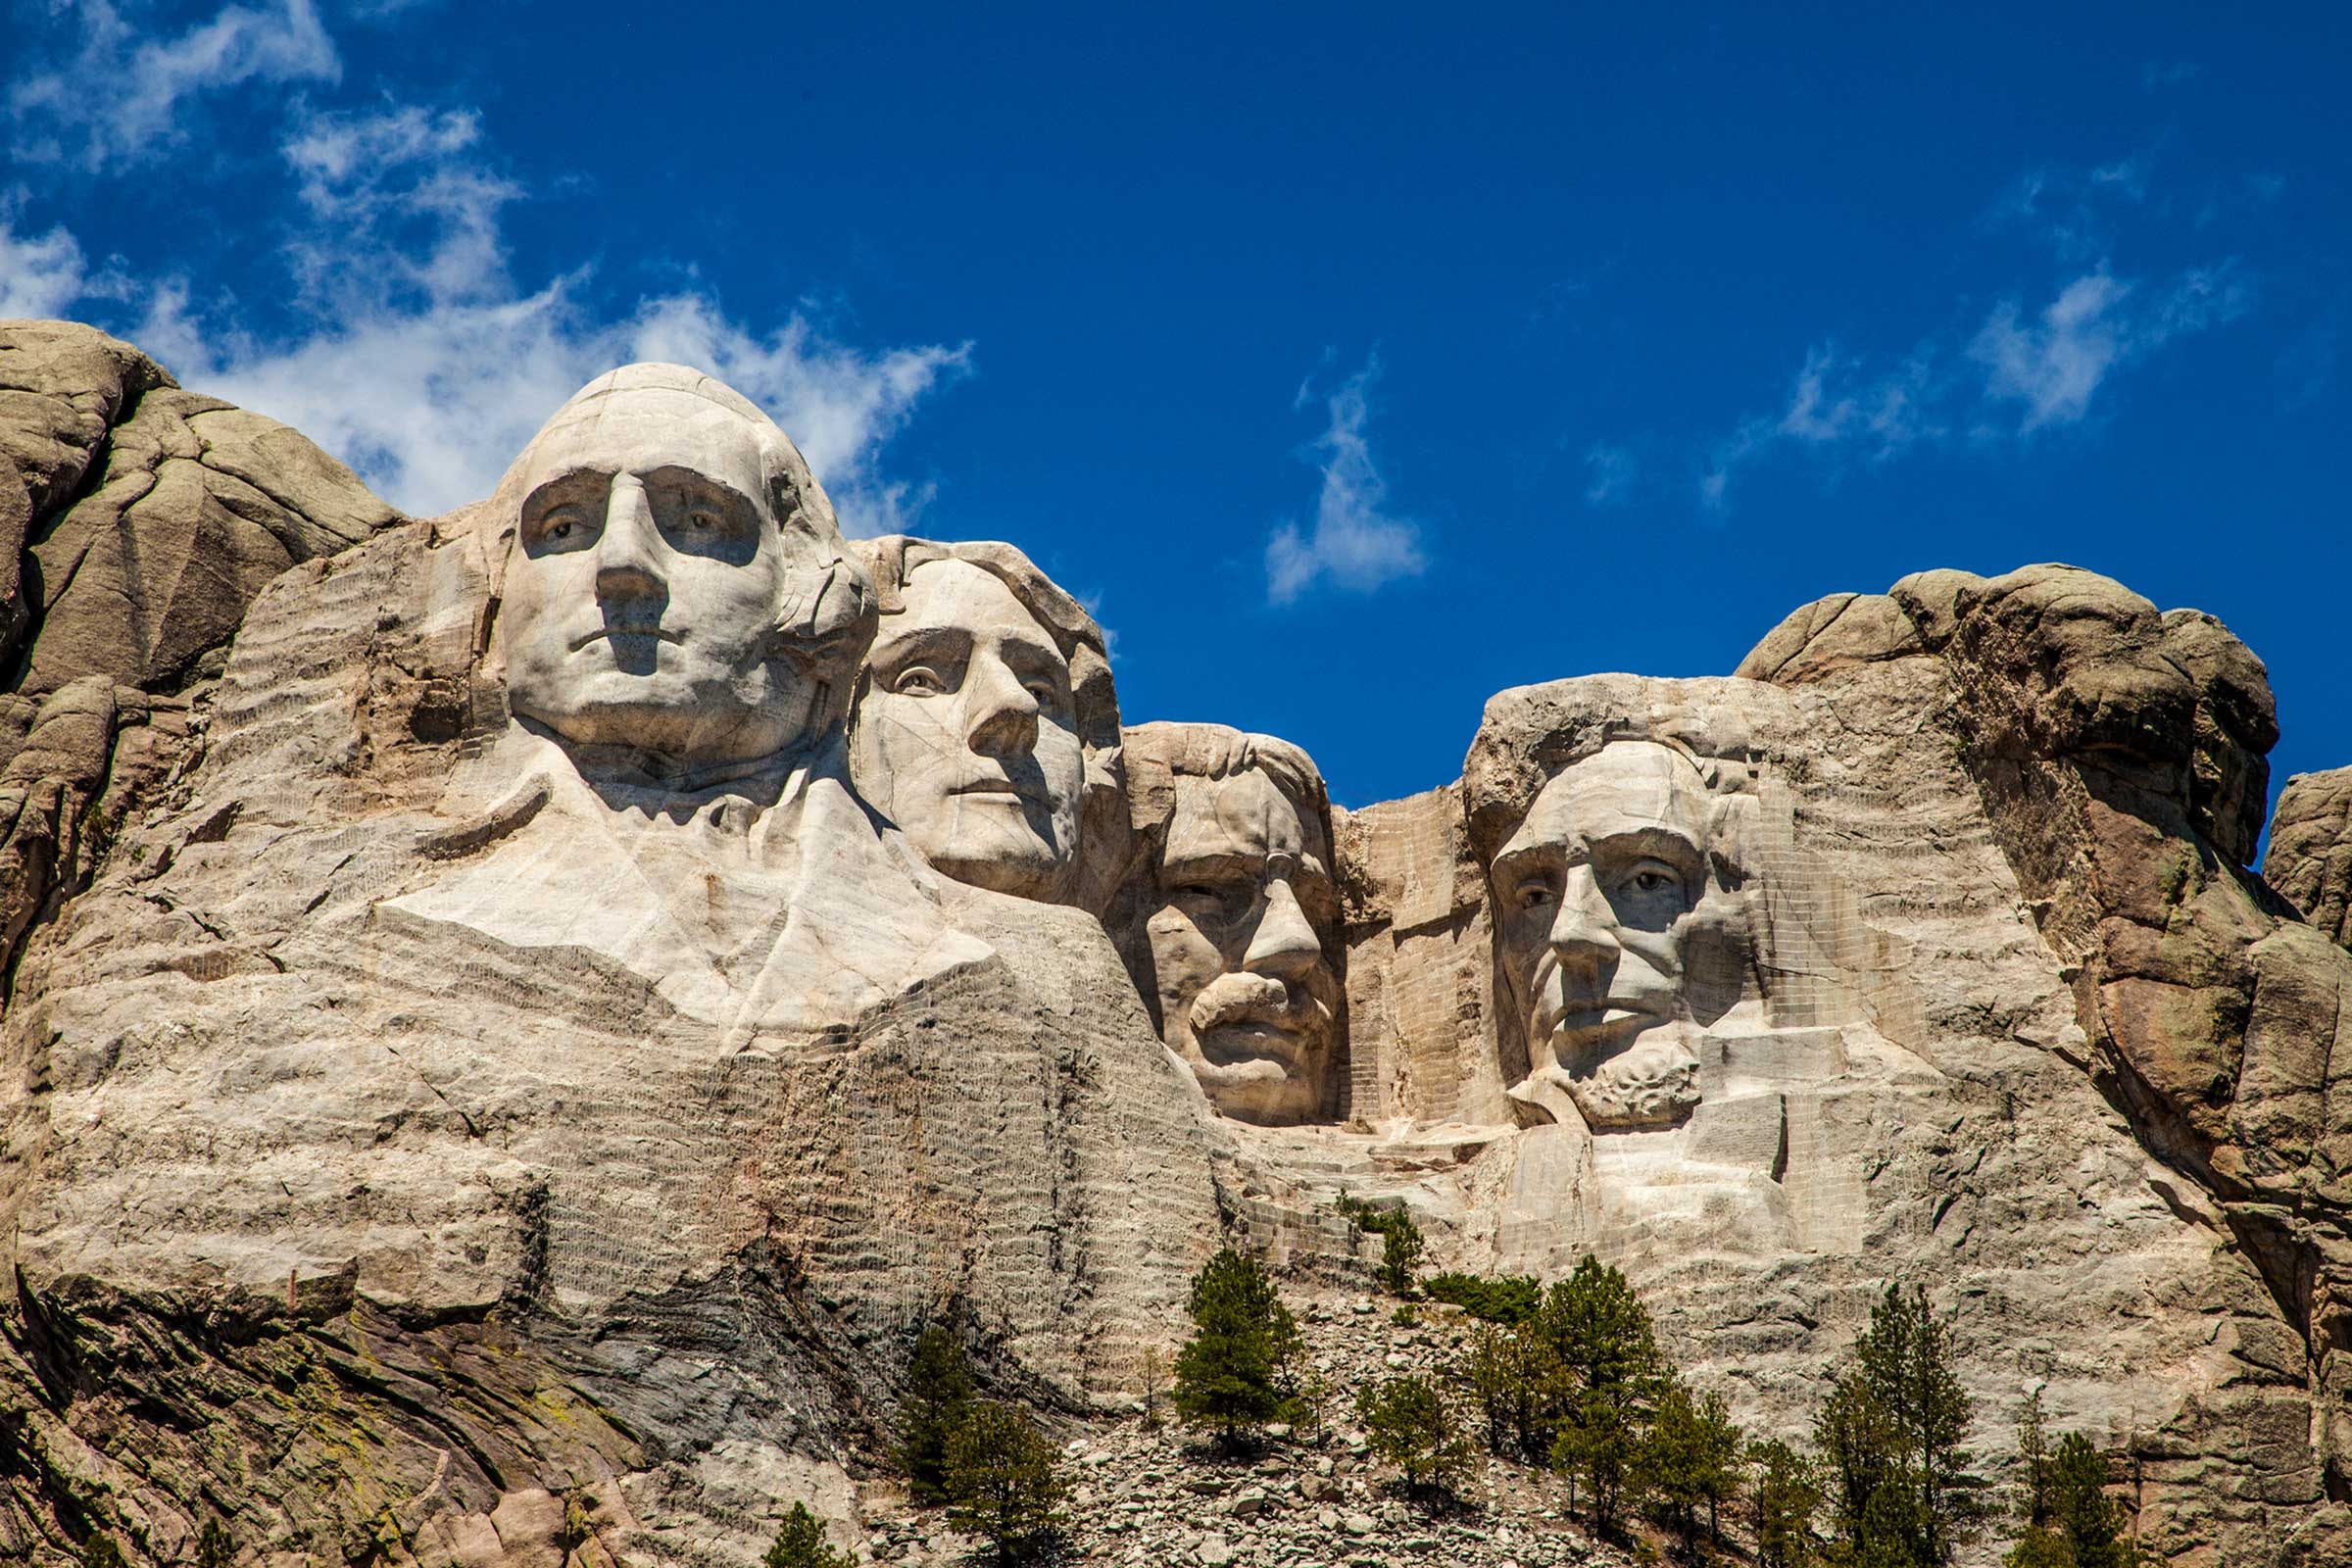 Why We Celebrate Presidents' Day | Reader’s Digest2400 x 1600